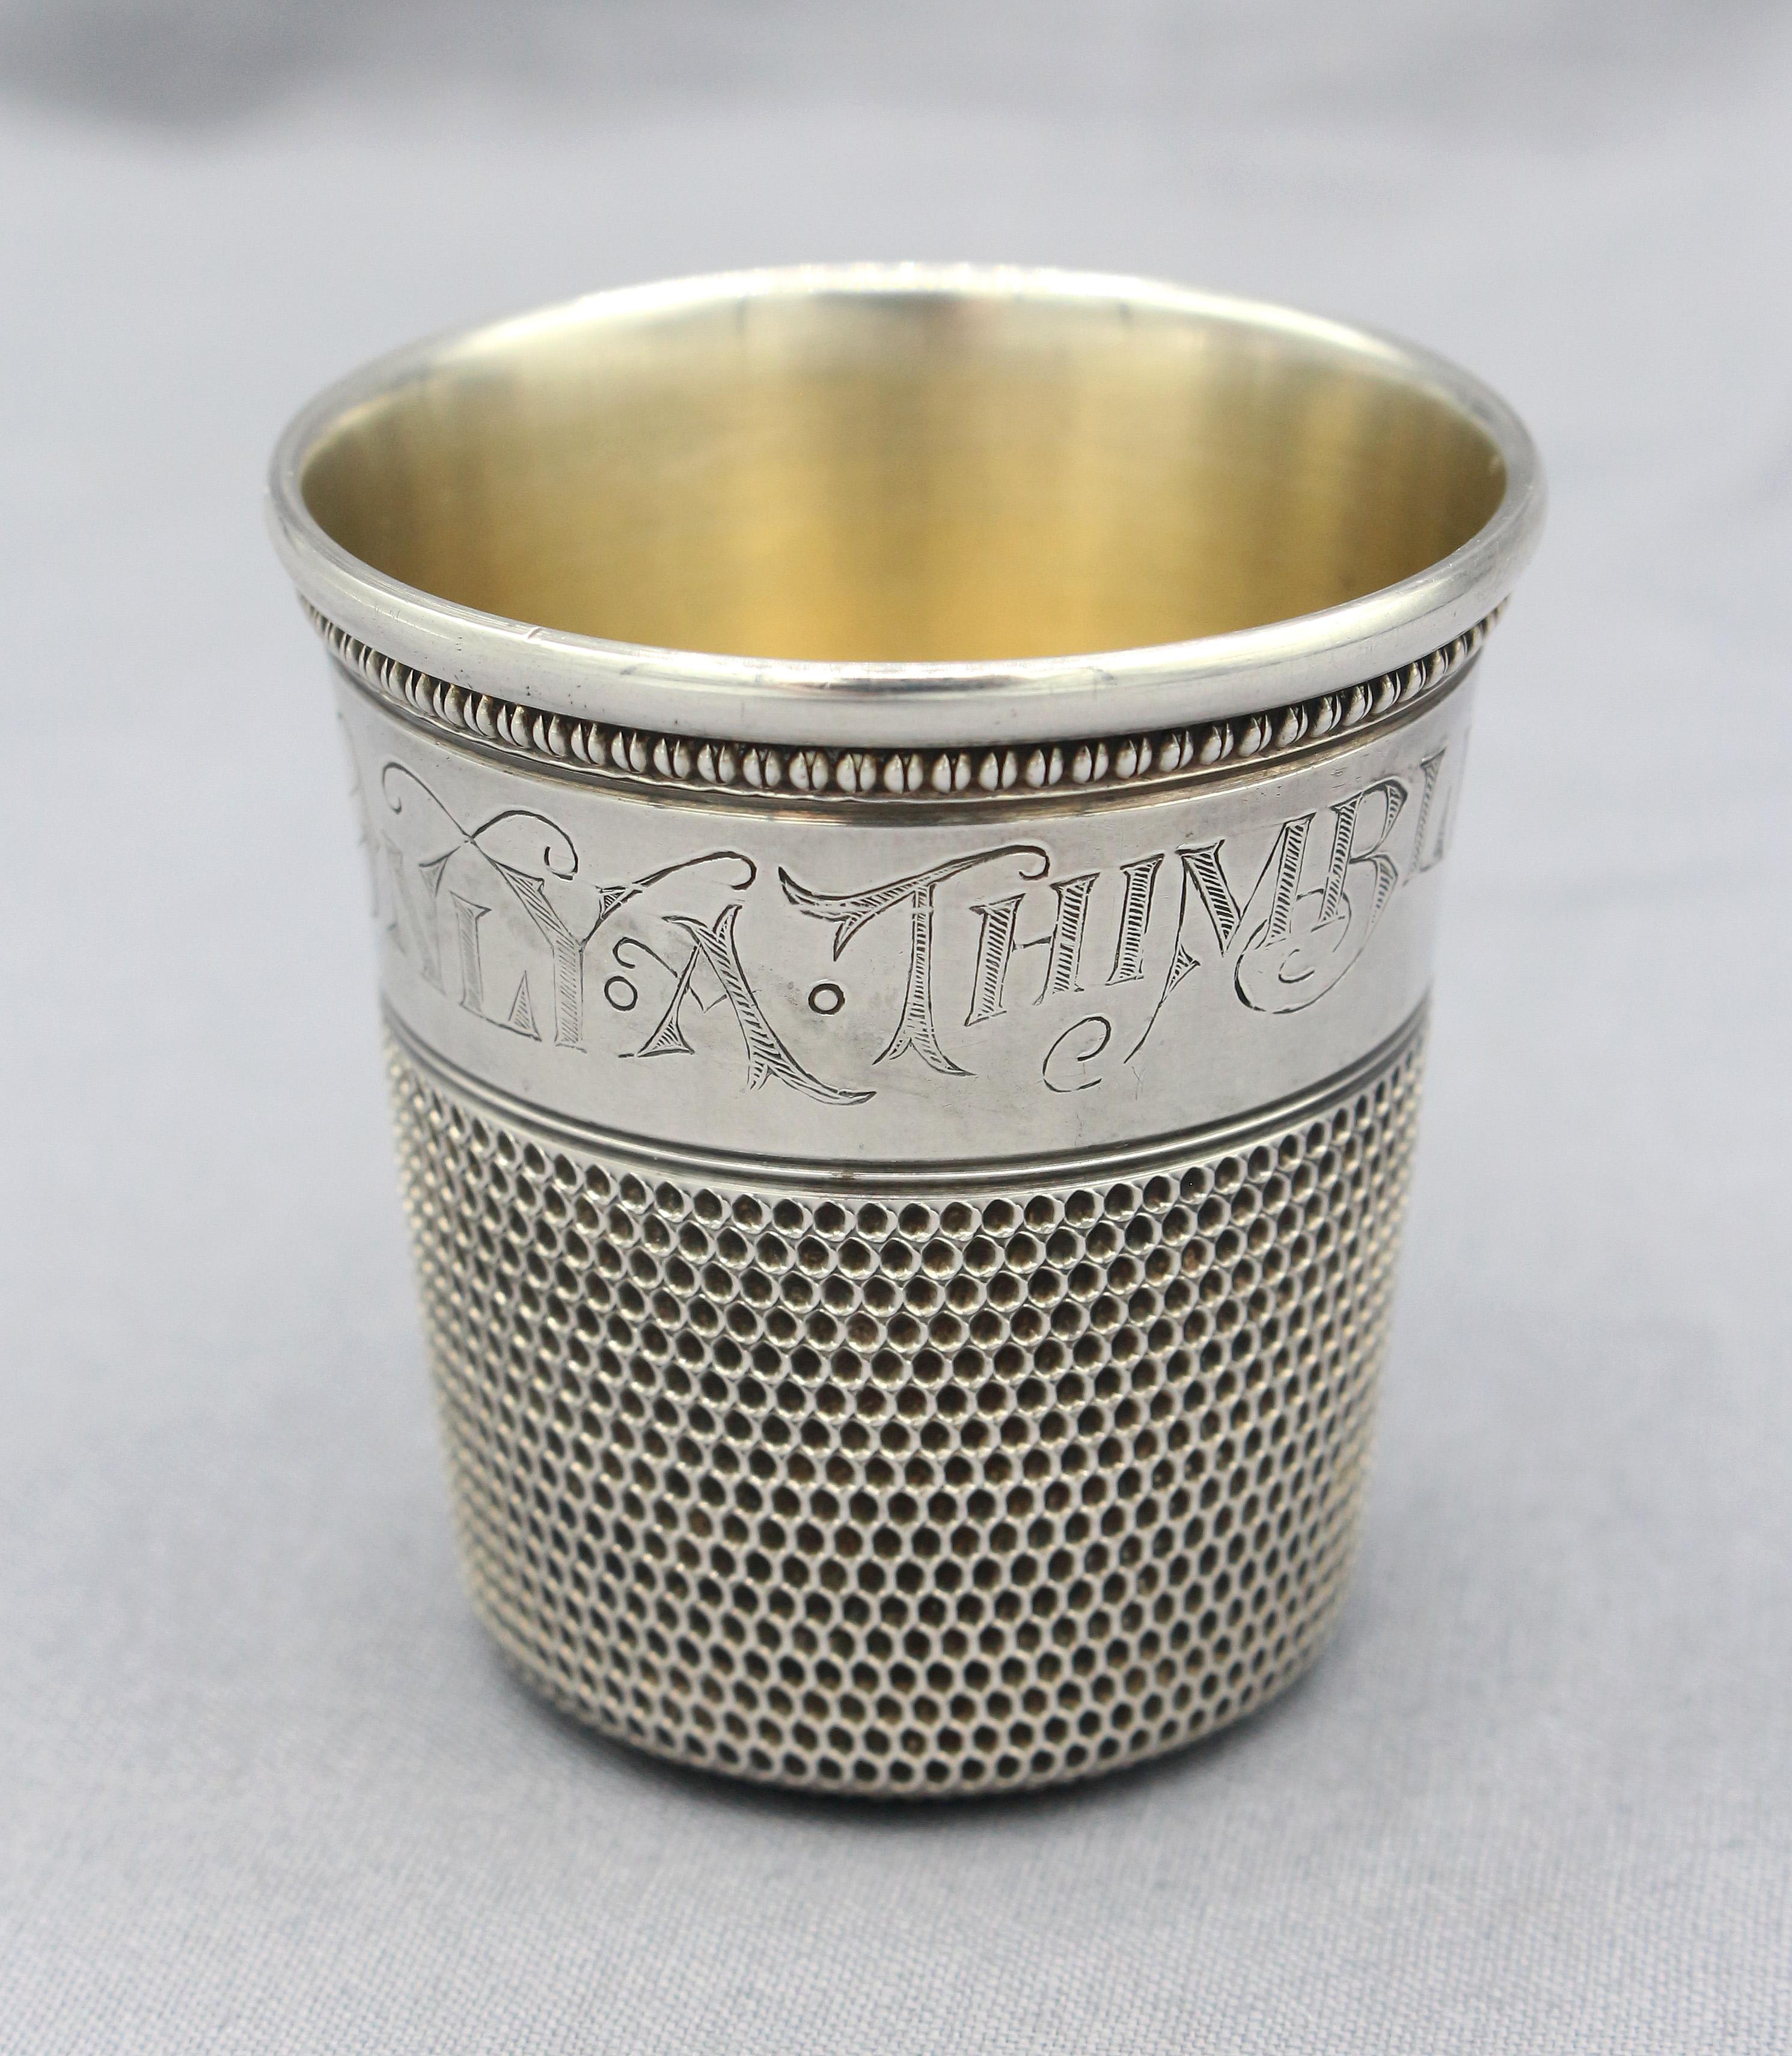 Sterling silver & vermeil giant thimble shot glass, late 19th century. Comically engraved 